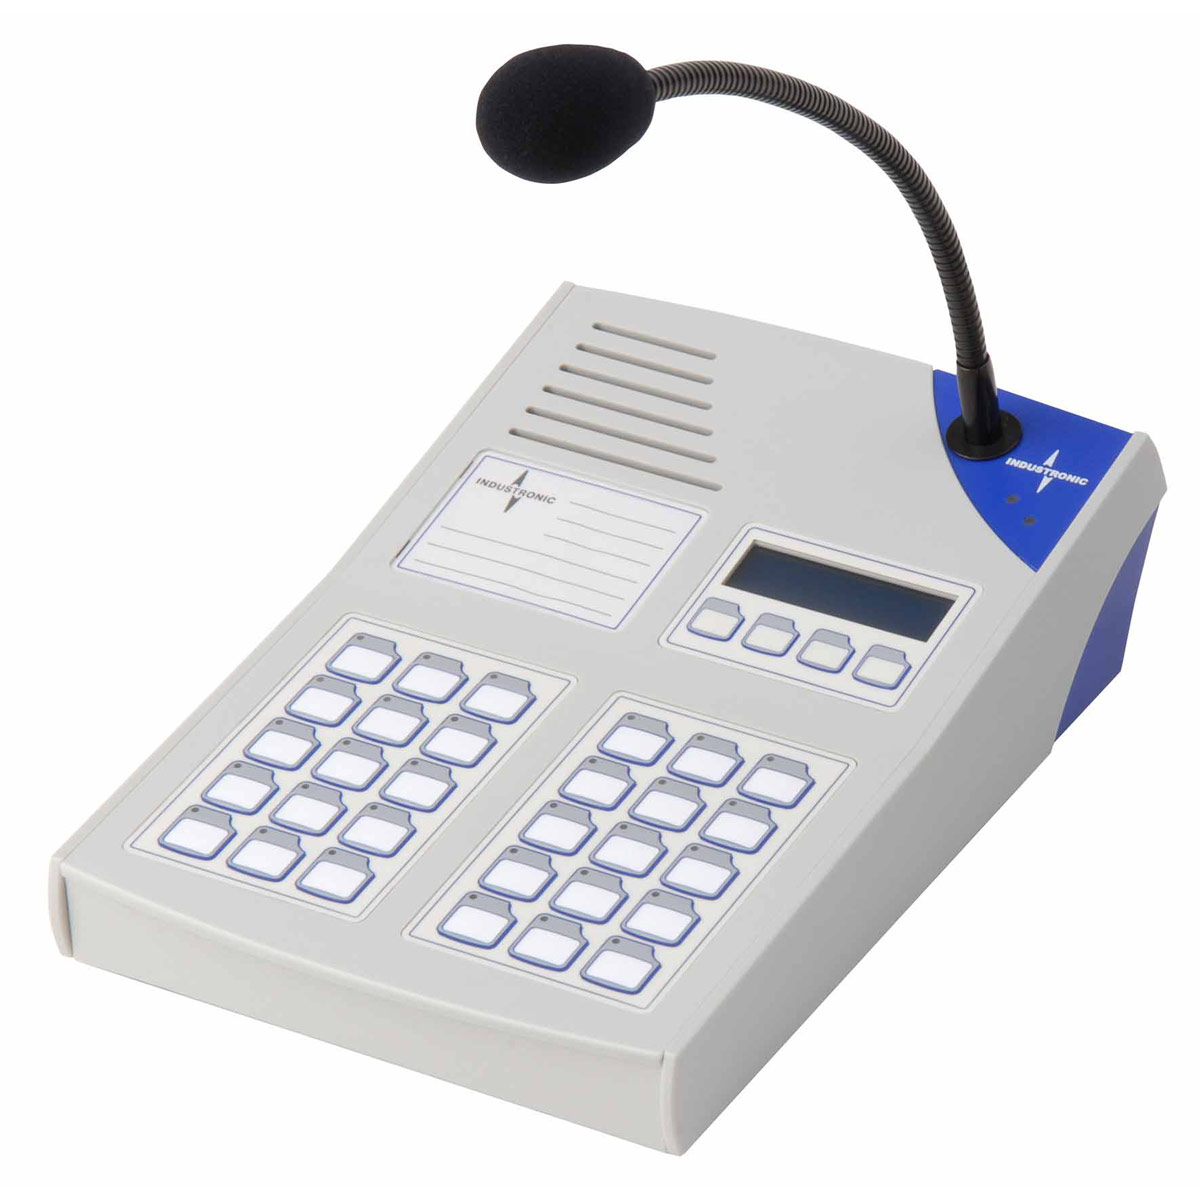 Digital Intercom Stationwith gooseneck microphone,  up to 60 keys, interface for handset connection,  LCD display and 4 function keys